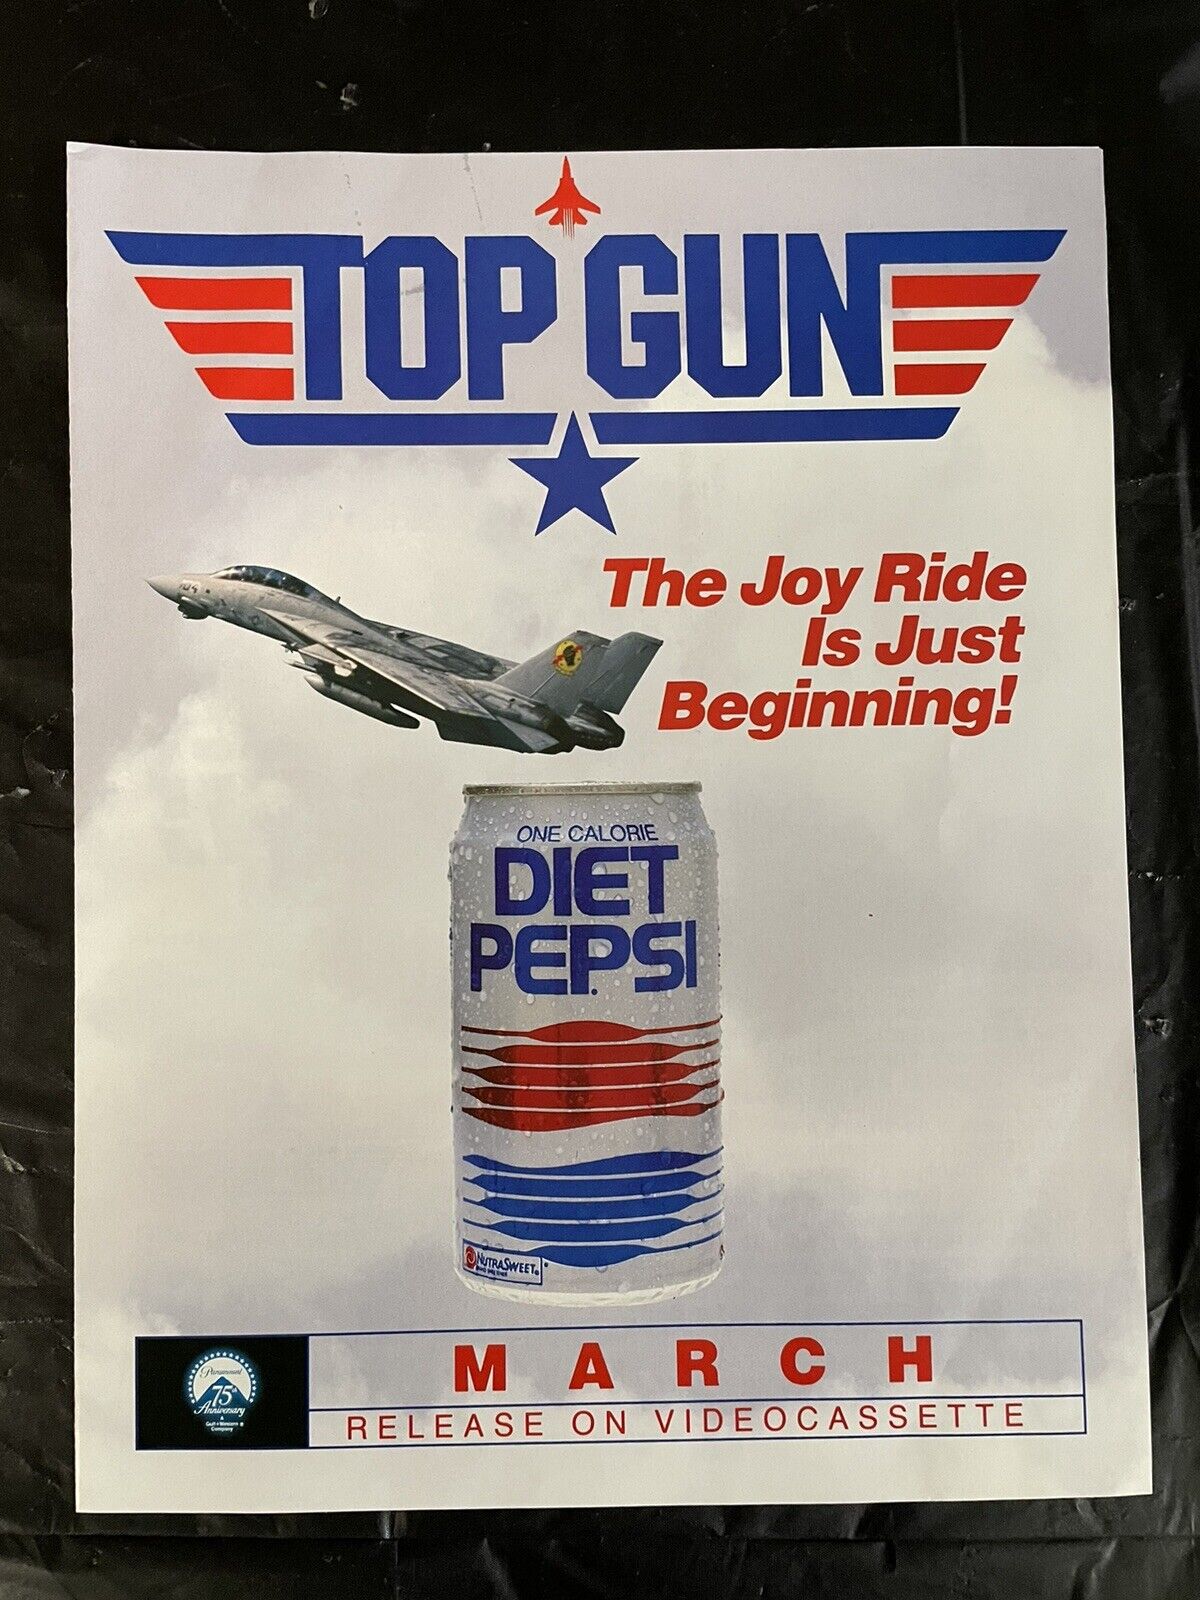 Top Gun Videocassette Diet Pepsi Sweepstakes Promotion Ad